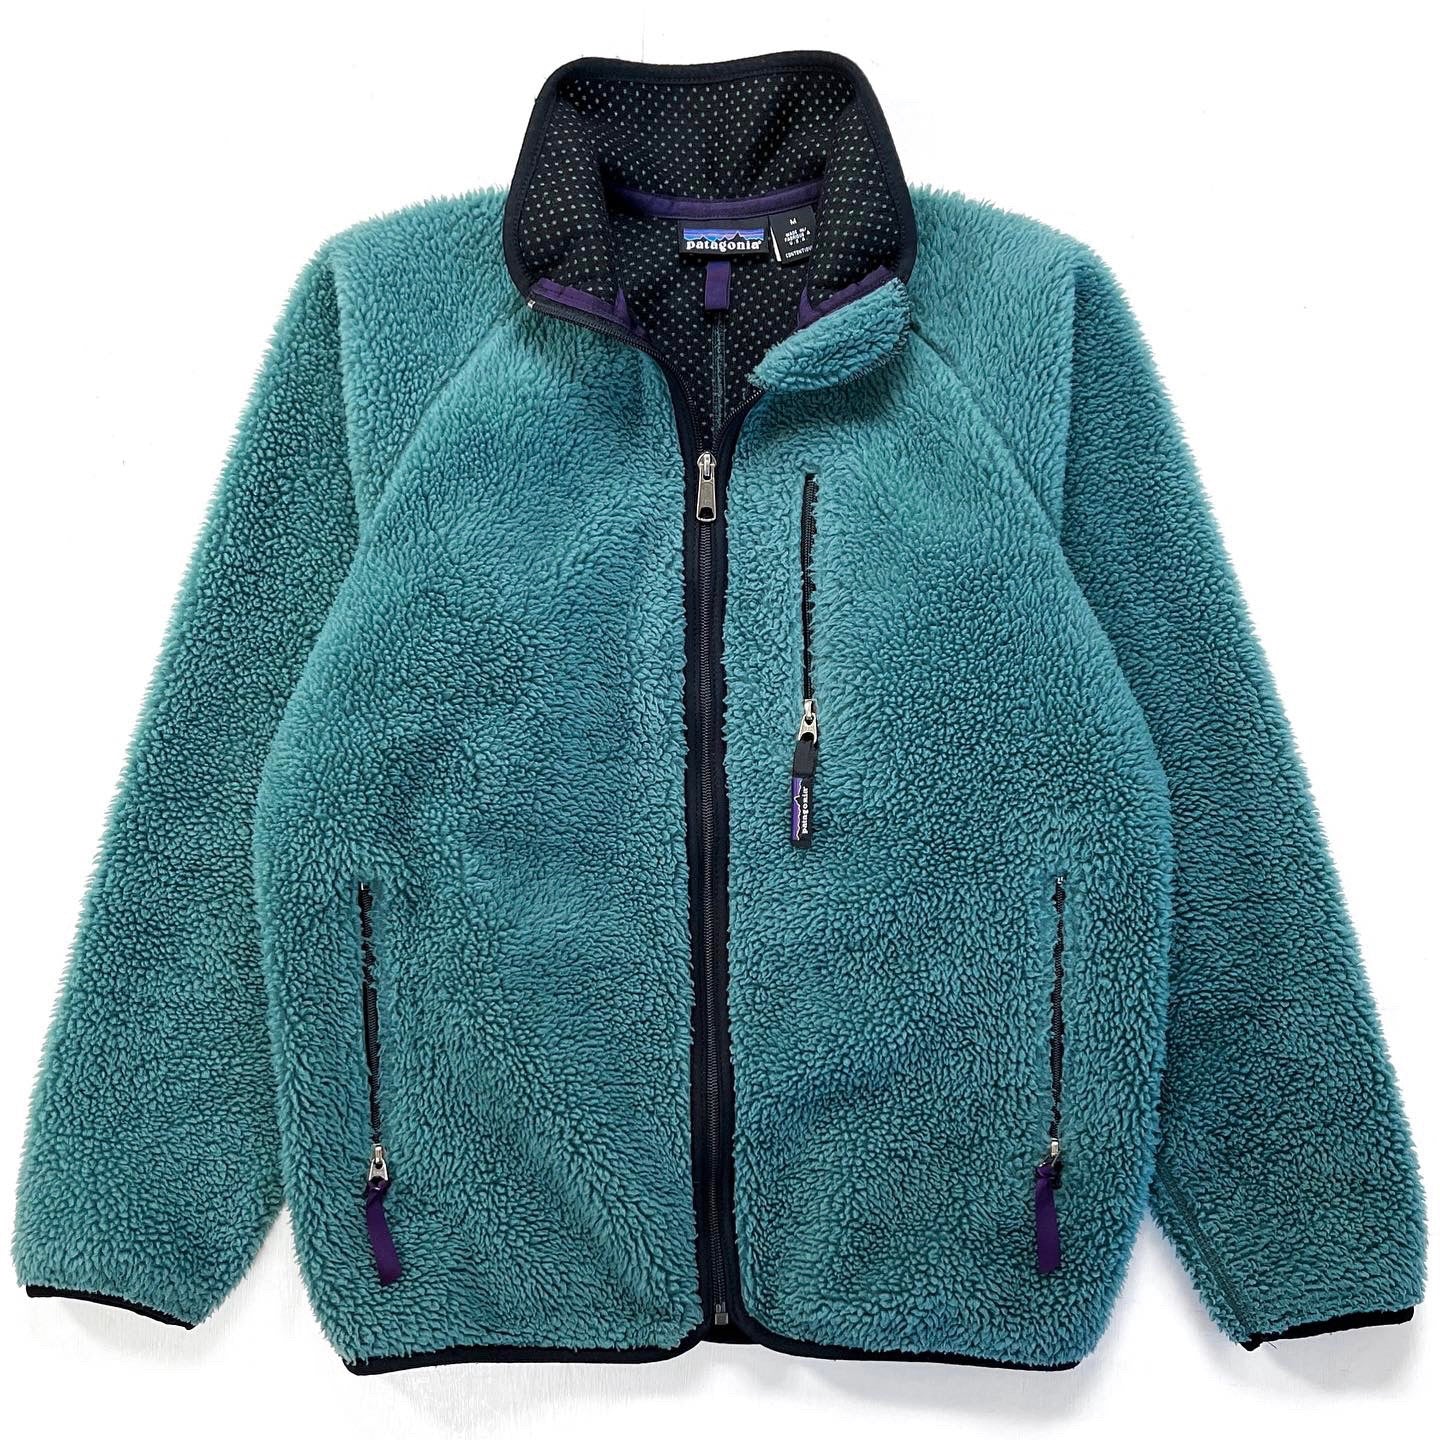 1996 Patagonia Made In The U.S.A. Retro Pile Cardigan, Fir Green (M)